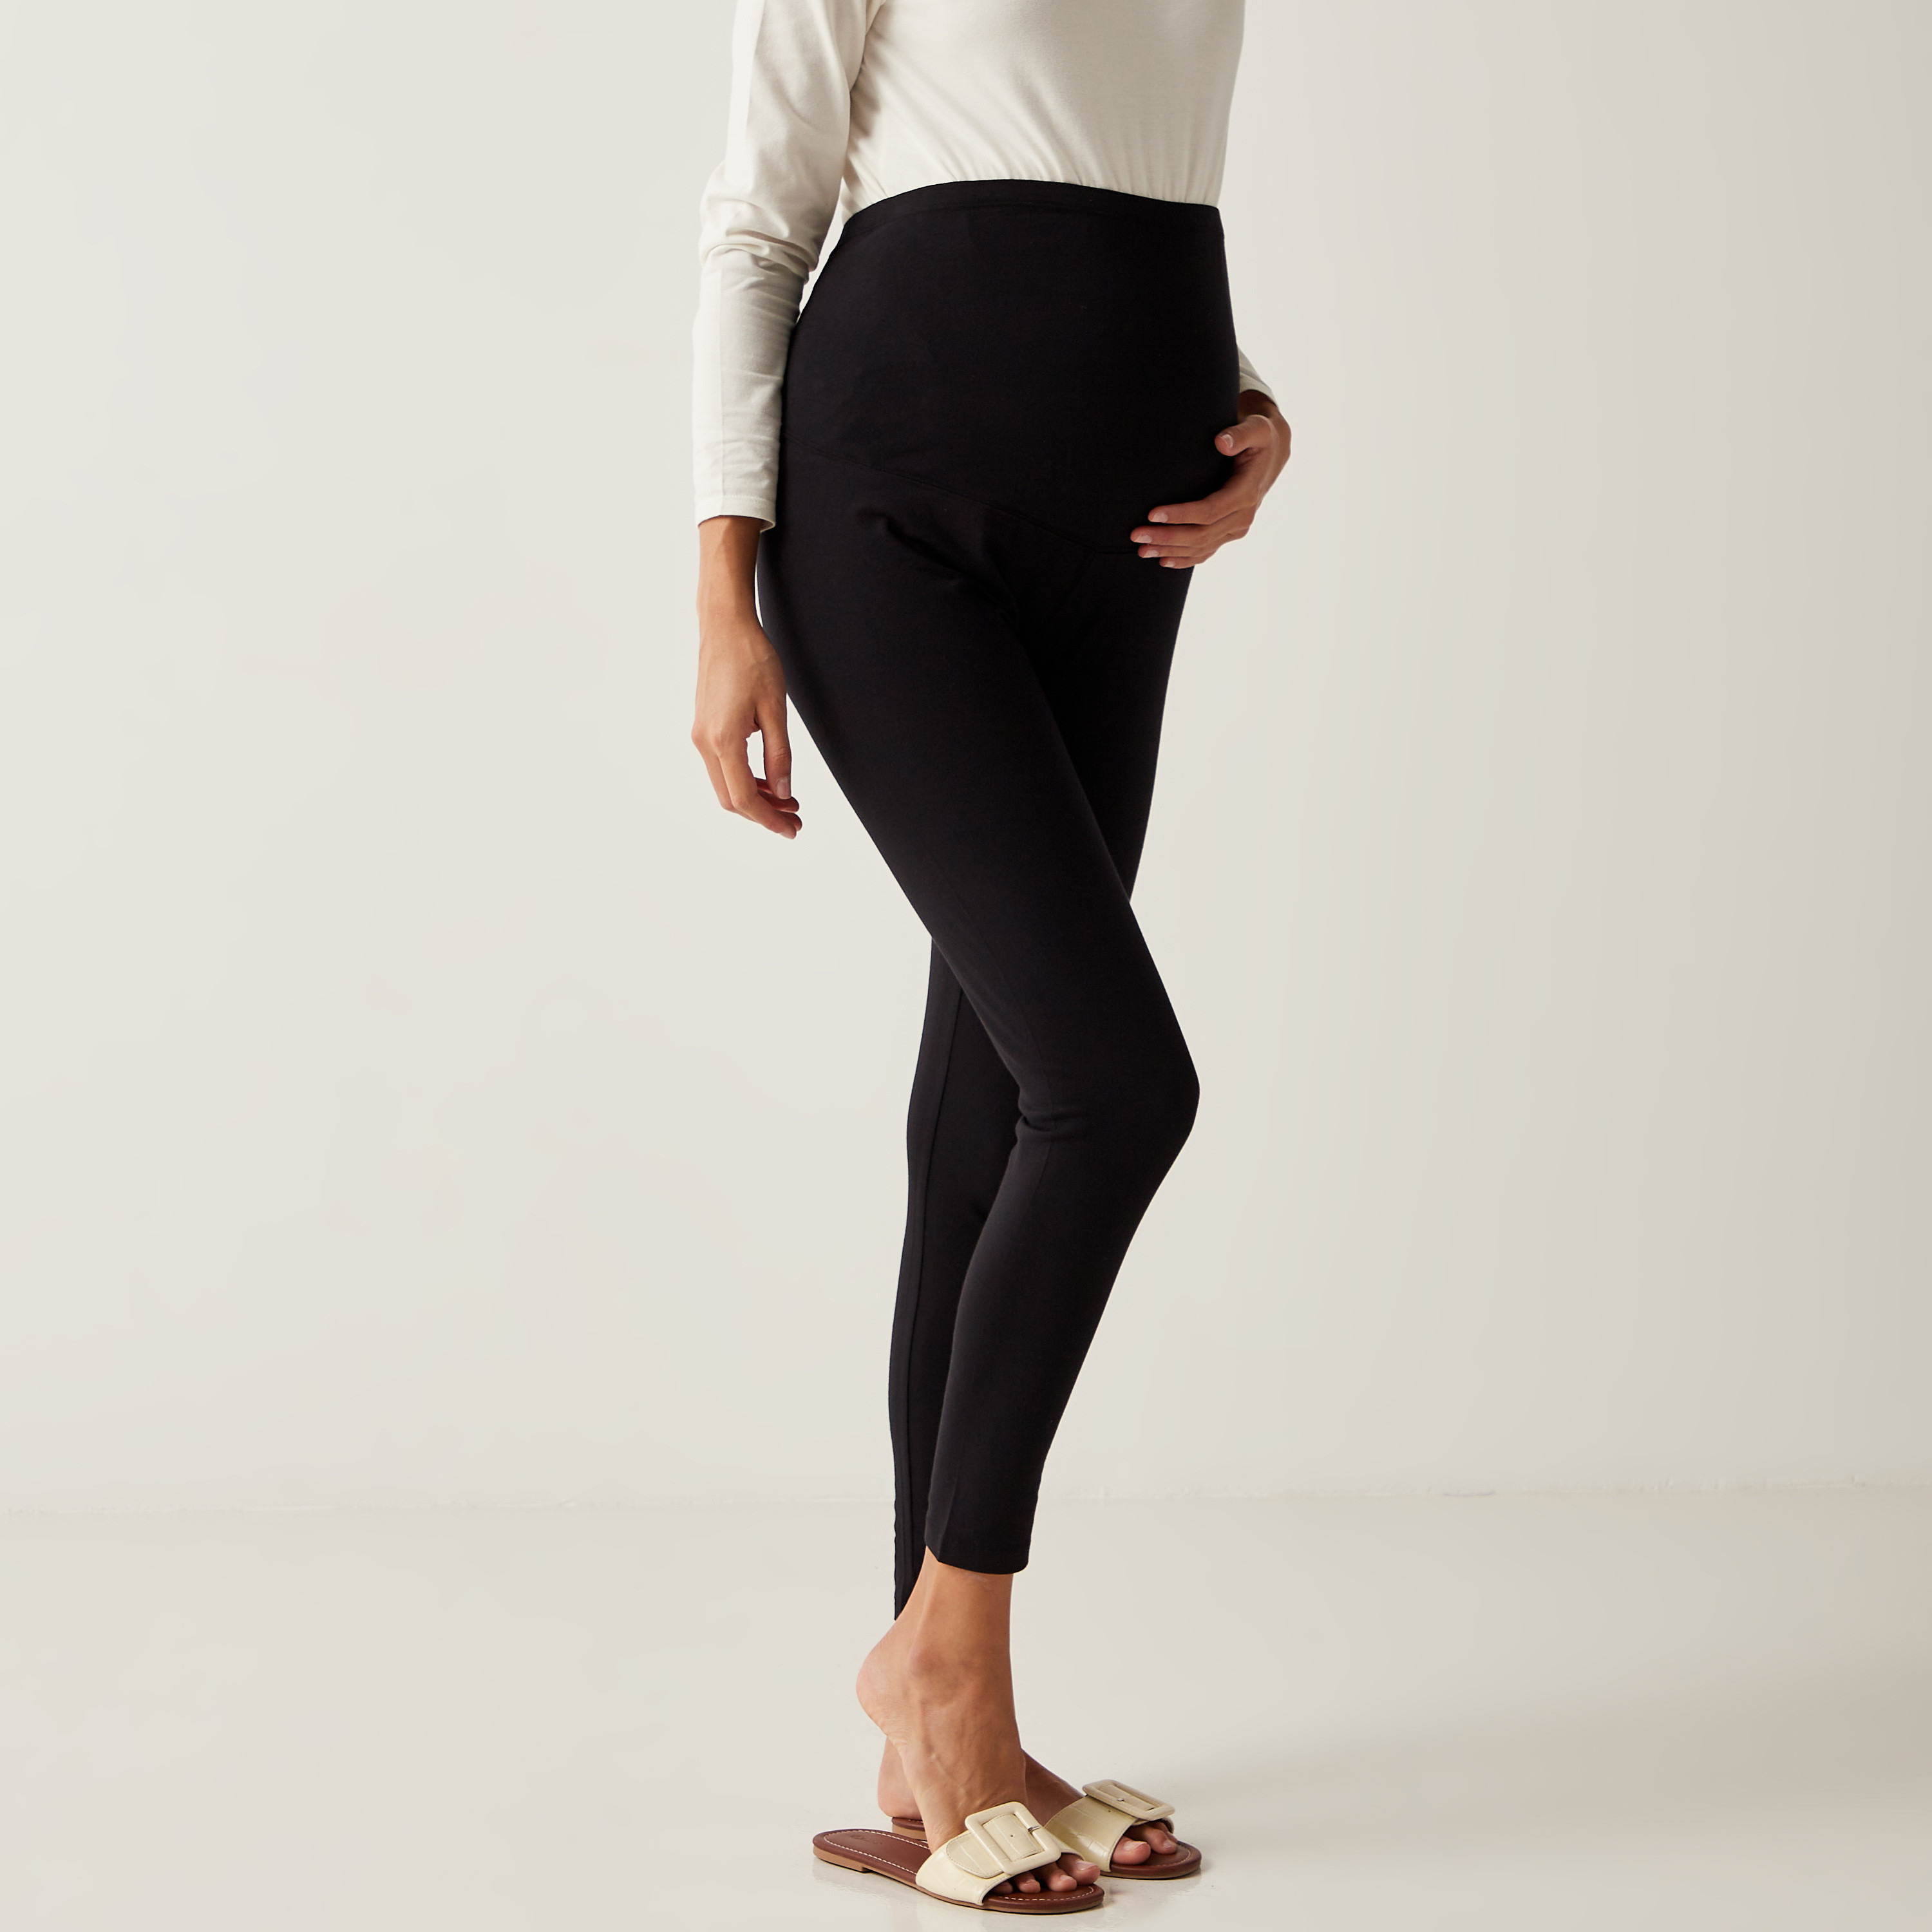 12 Best Maternity Tights for Comfort and Style